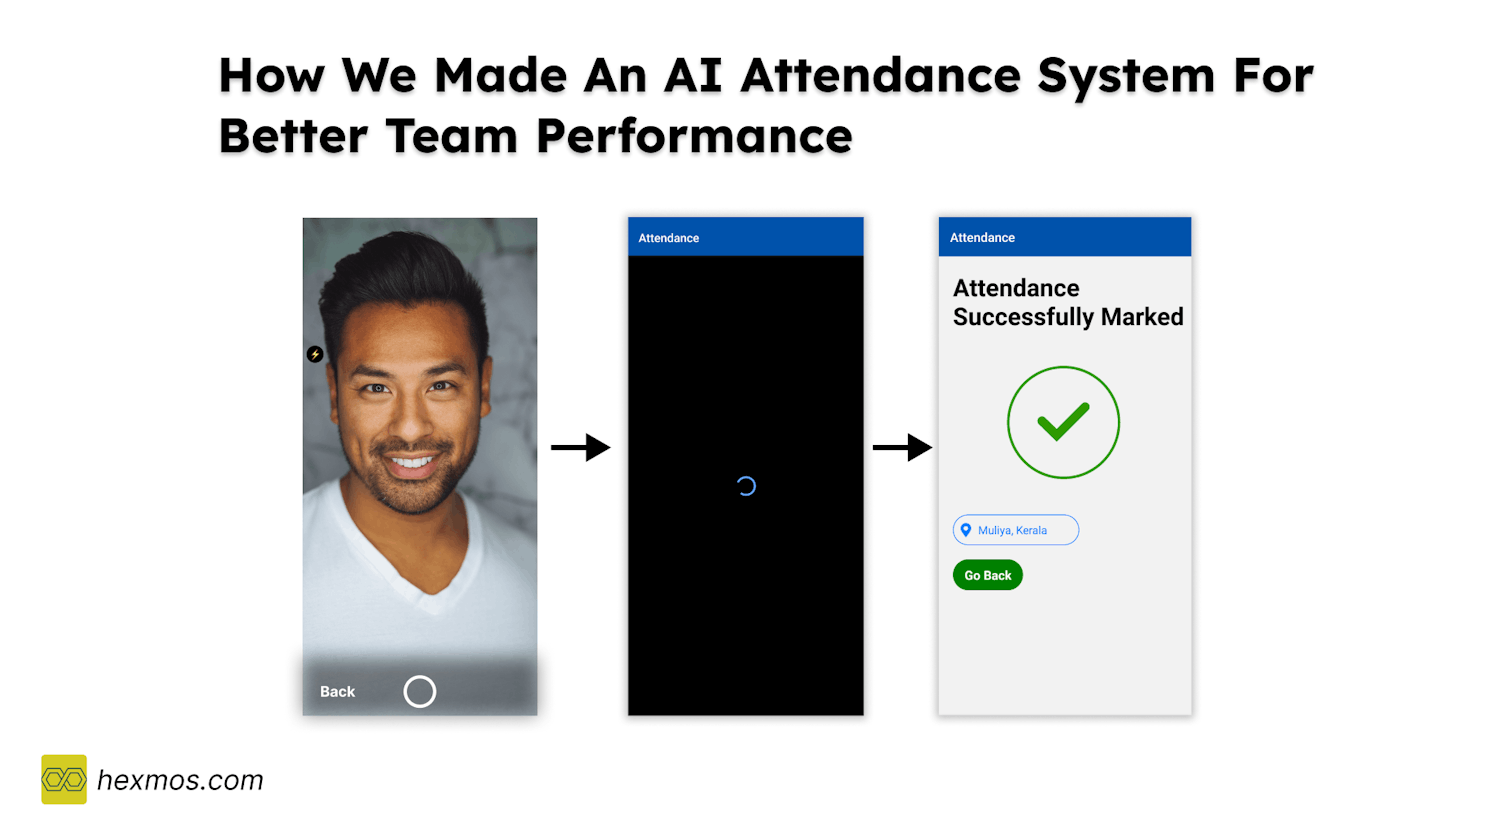 How we made an AI Attendance System for better Team Performance